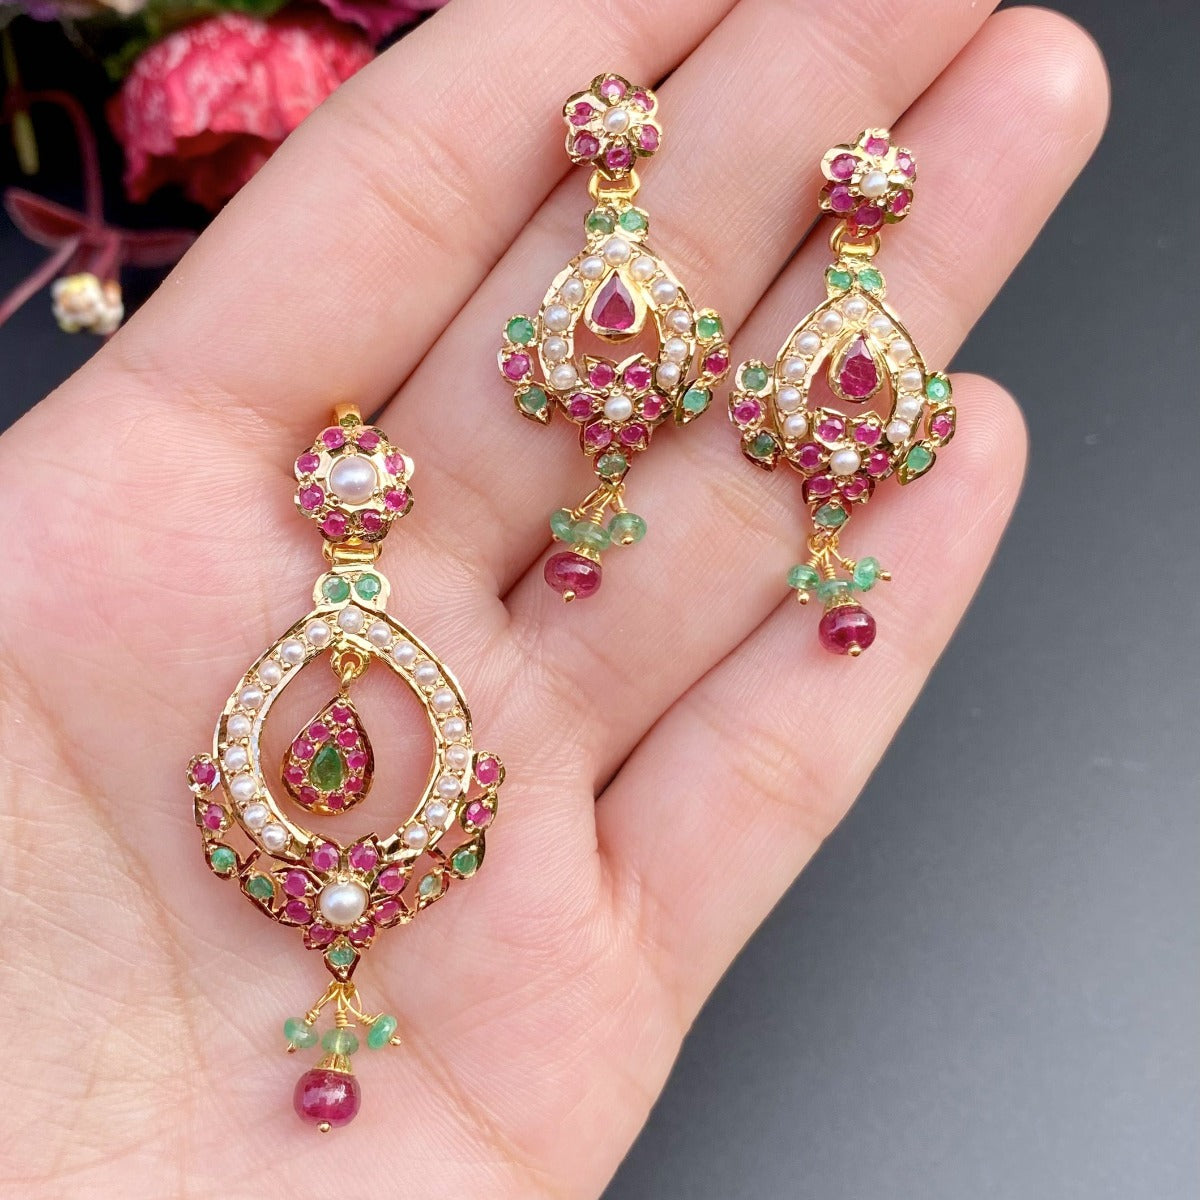 Shop Gold Pendant and Earring Sets in usa